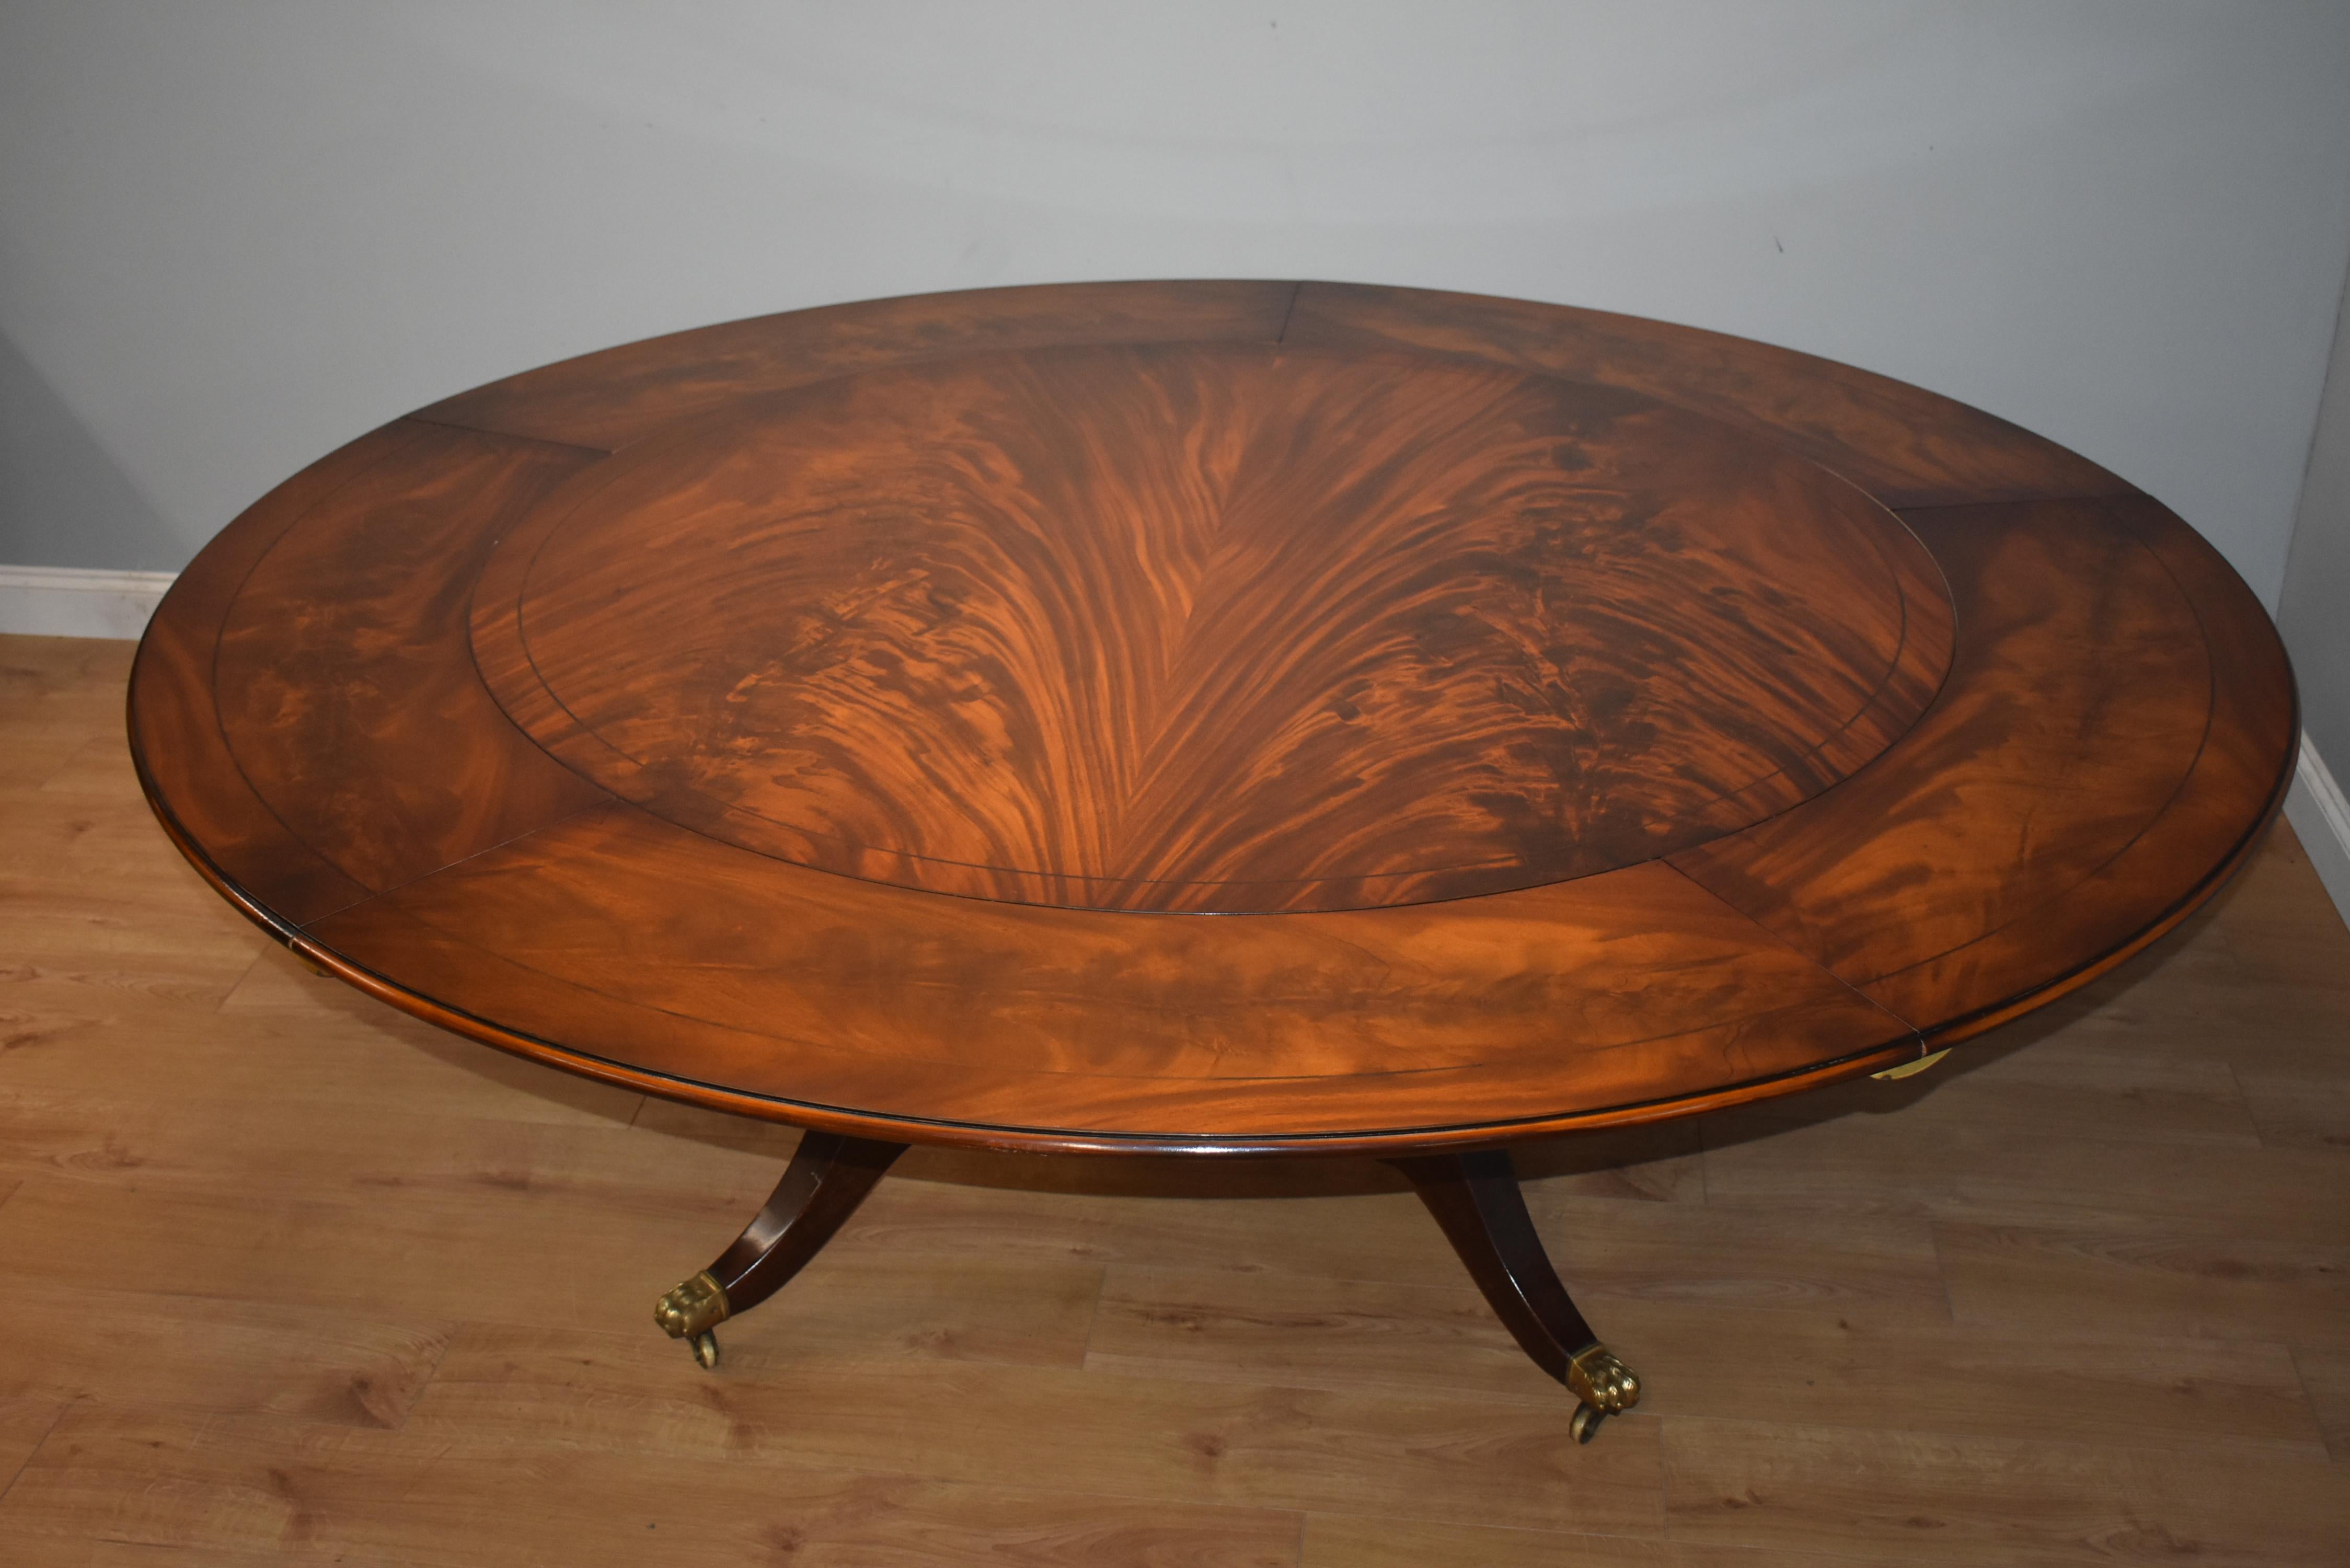 For sale is a fine quality George III style mahogany Jupe table. The circular top, veneered in beautiful flame mahogany has five additional leaves, allowing the table to extend to seat 12 people. Each leaf is also veneered in superbly figured